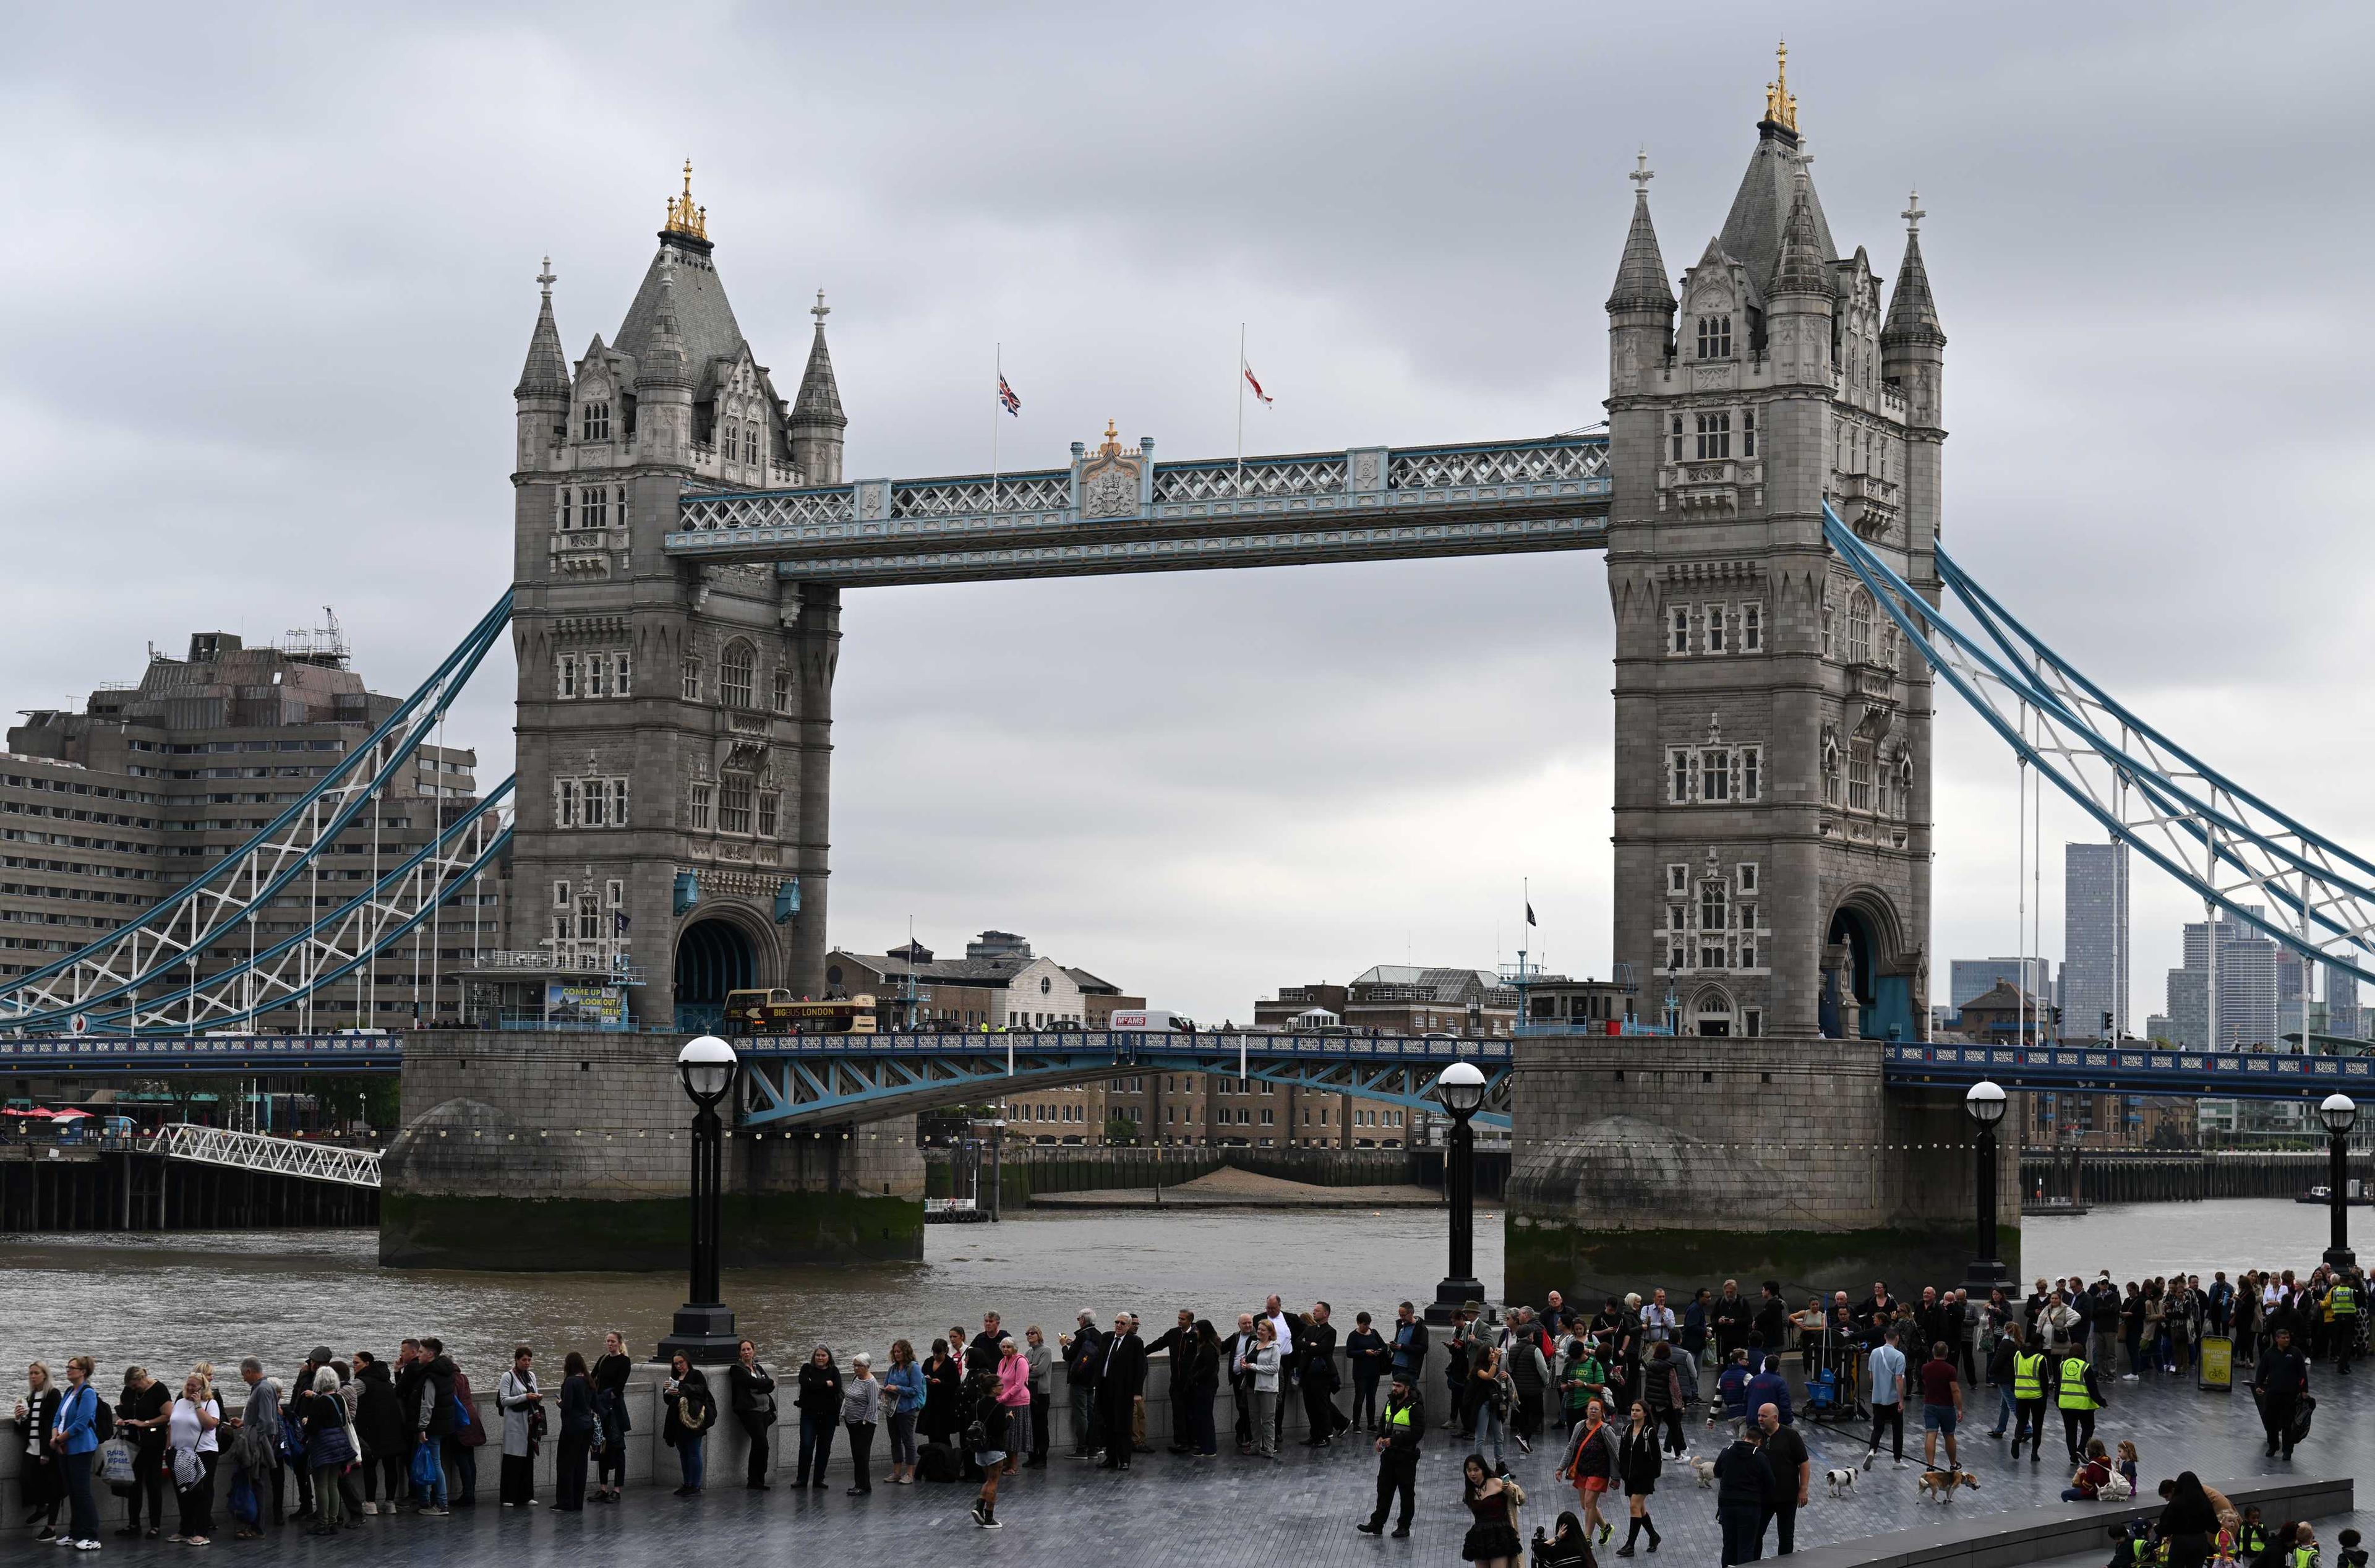 Members of the public stand in the queue on the South Bank of the River Thames, alongside Tower Bridge, as they wait in line to pay their respects to the late Queen Elizabeth II, in London on Sept 15. Photo: AFP 